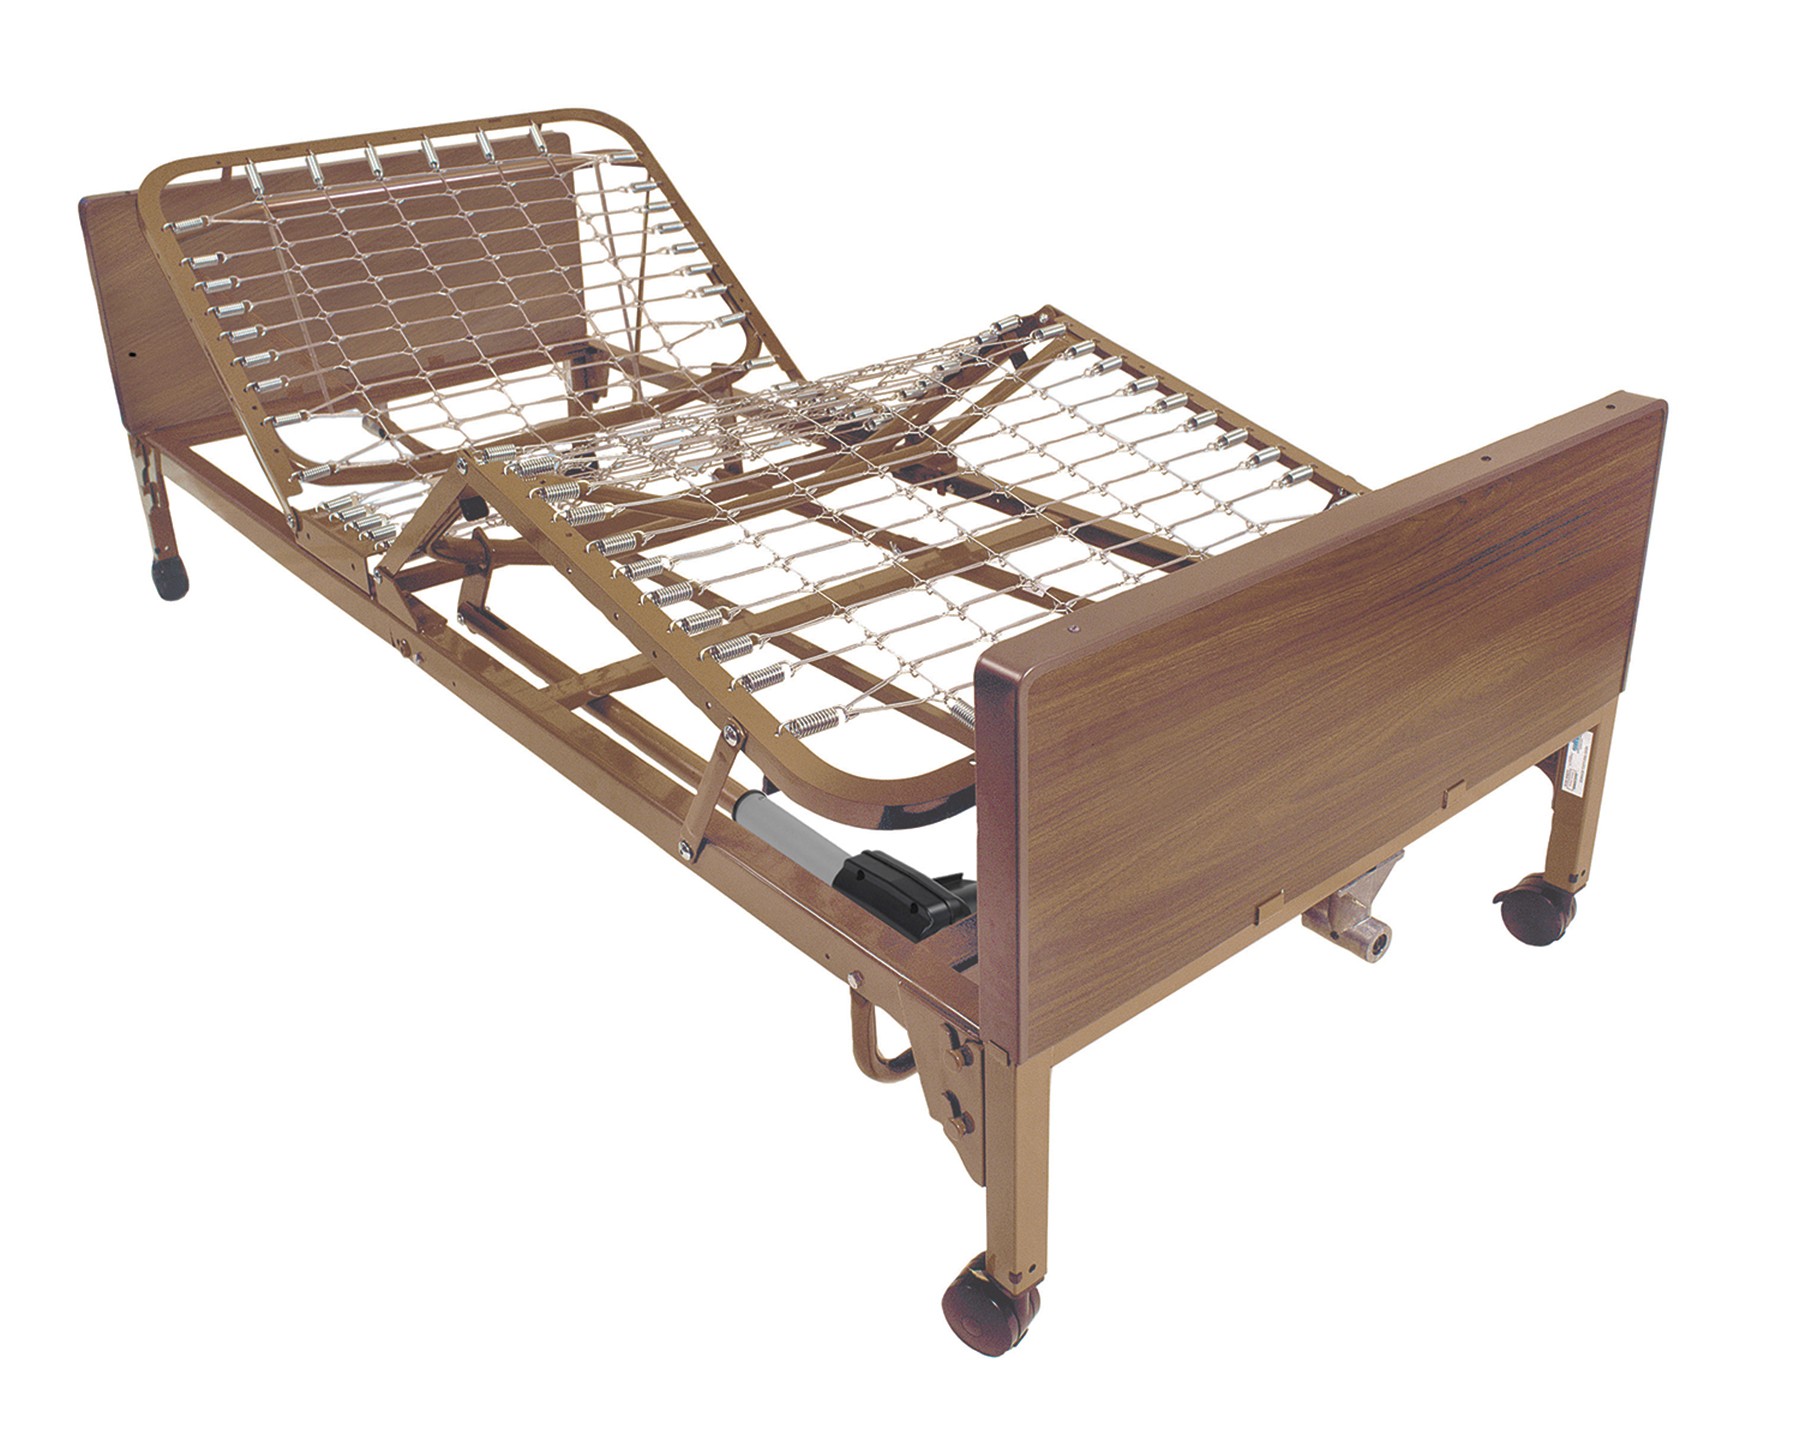 Los Angeles inexpensive Electric Hospital Beds cheap discount sale price